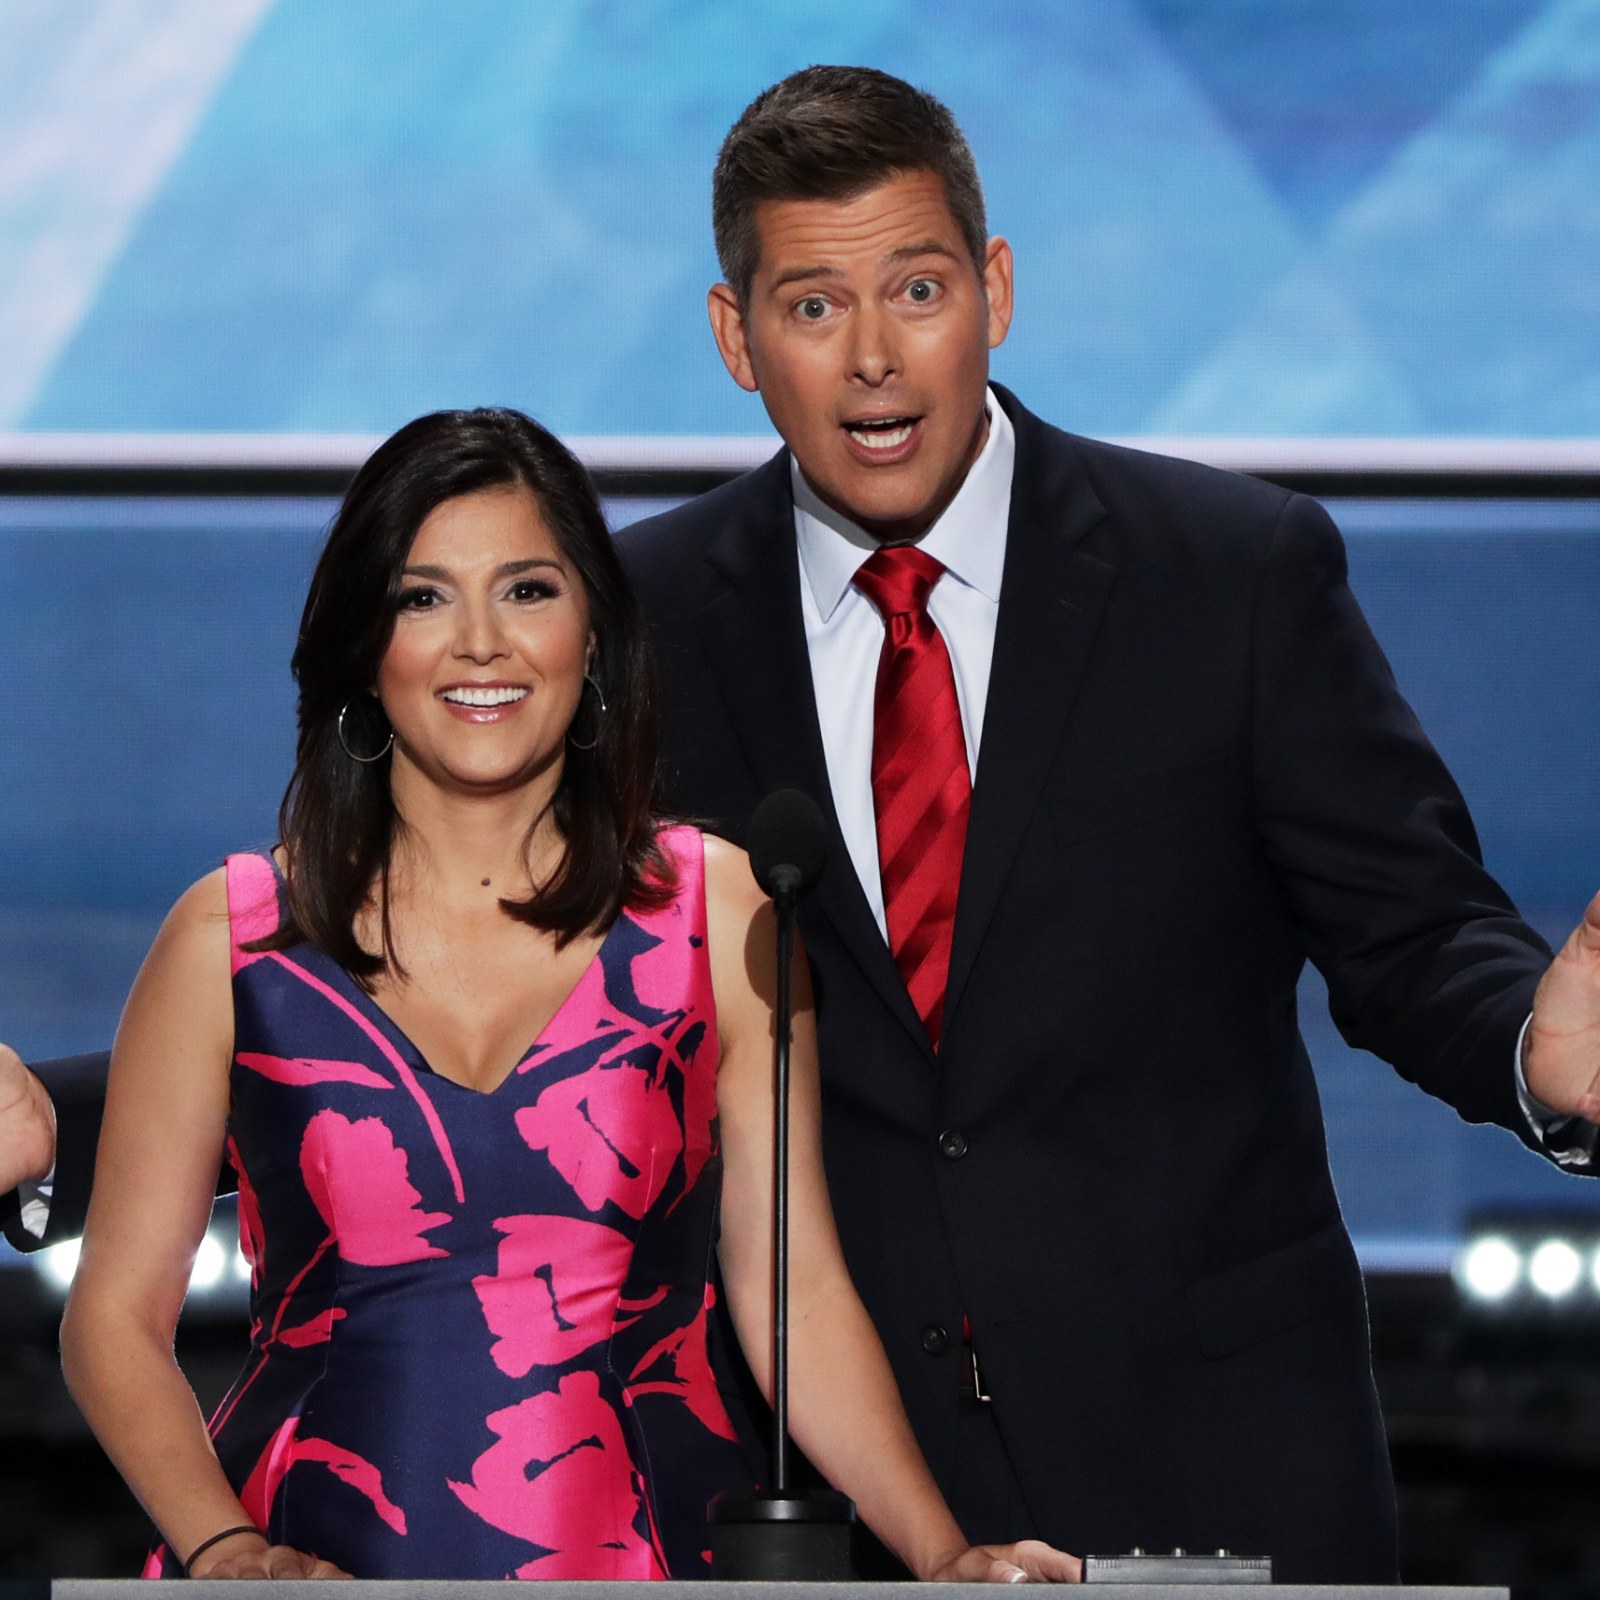 Who Is Sean Duffy's Wife, Rachel Campos-Duffy? World' Politician From Politics